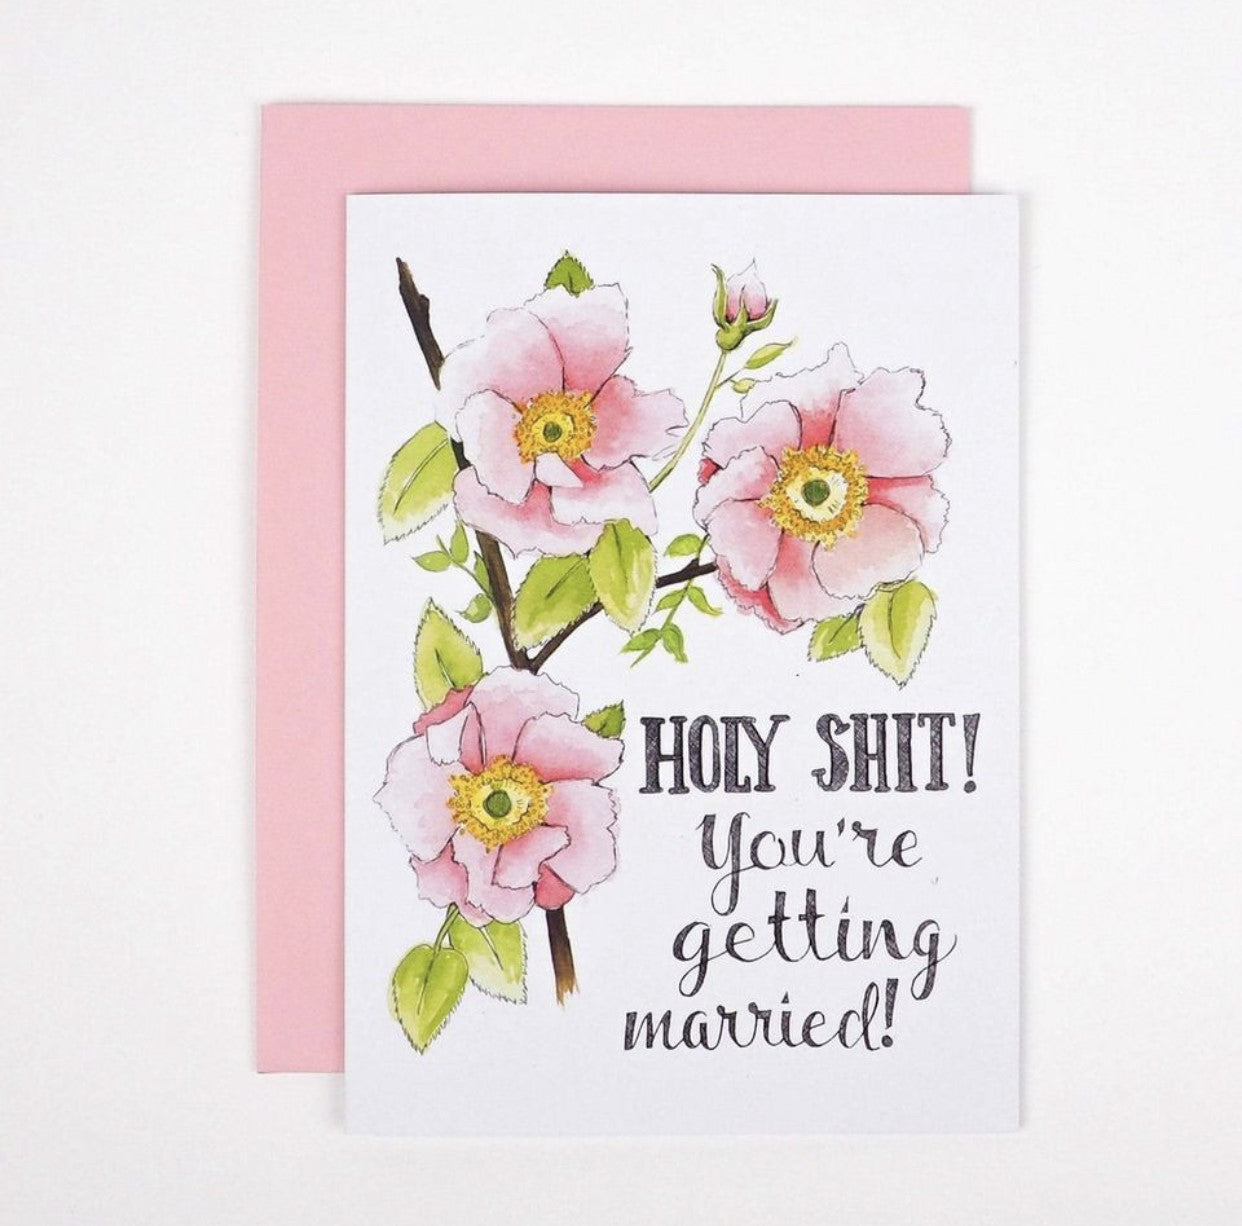 Holy Shit! You're Getting Married Card